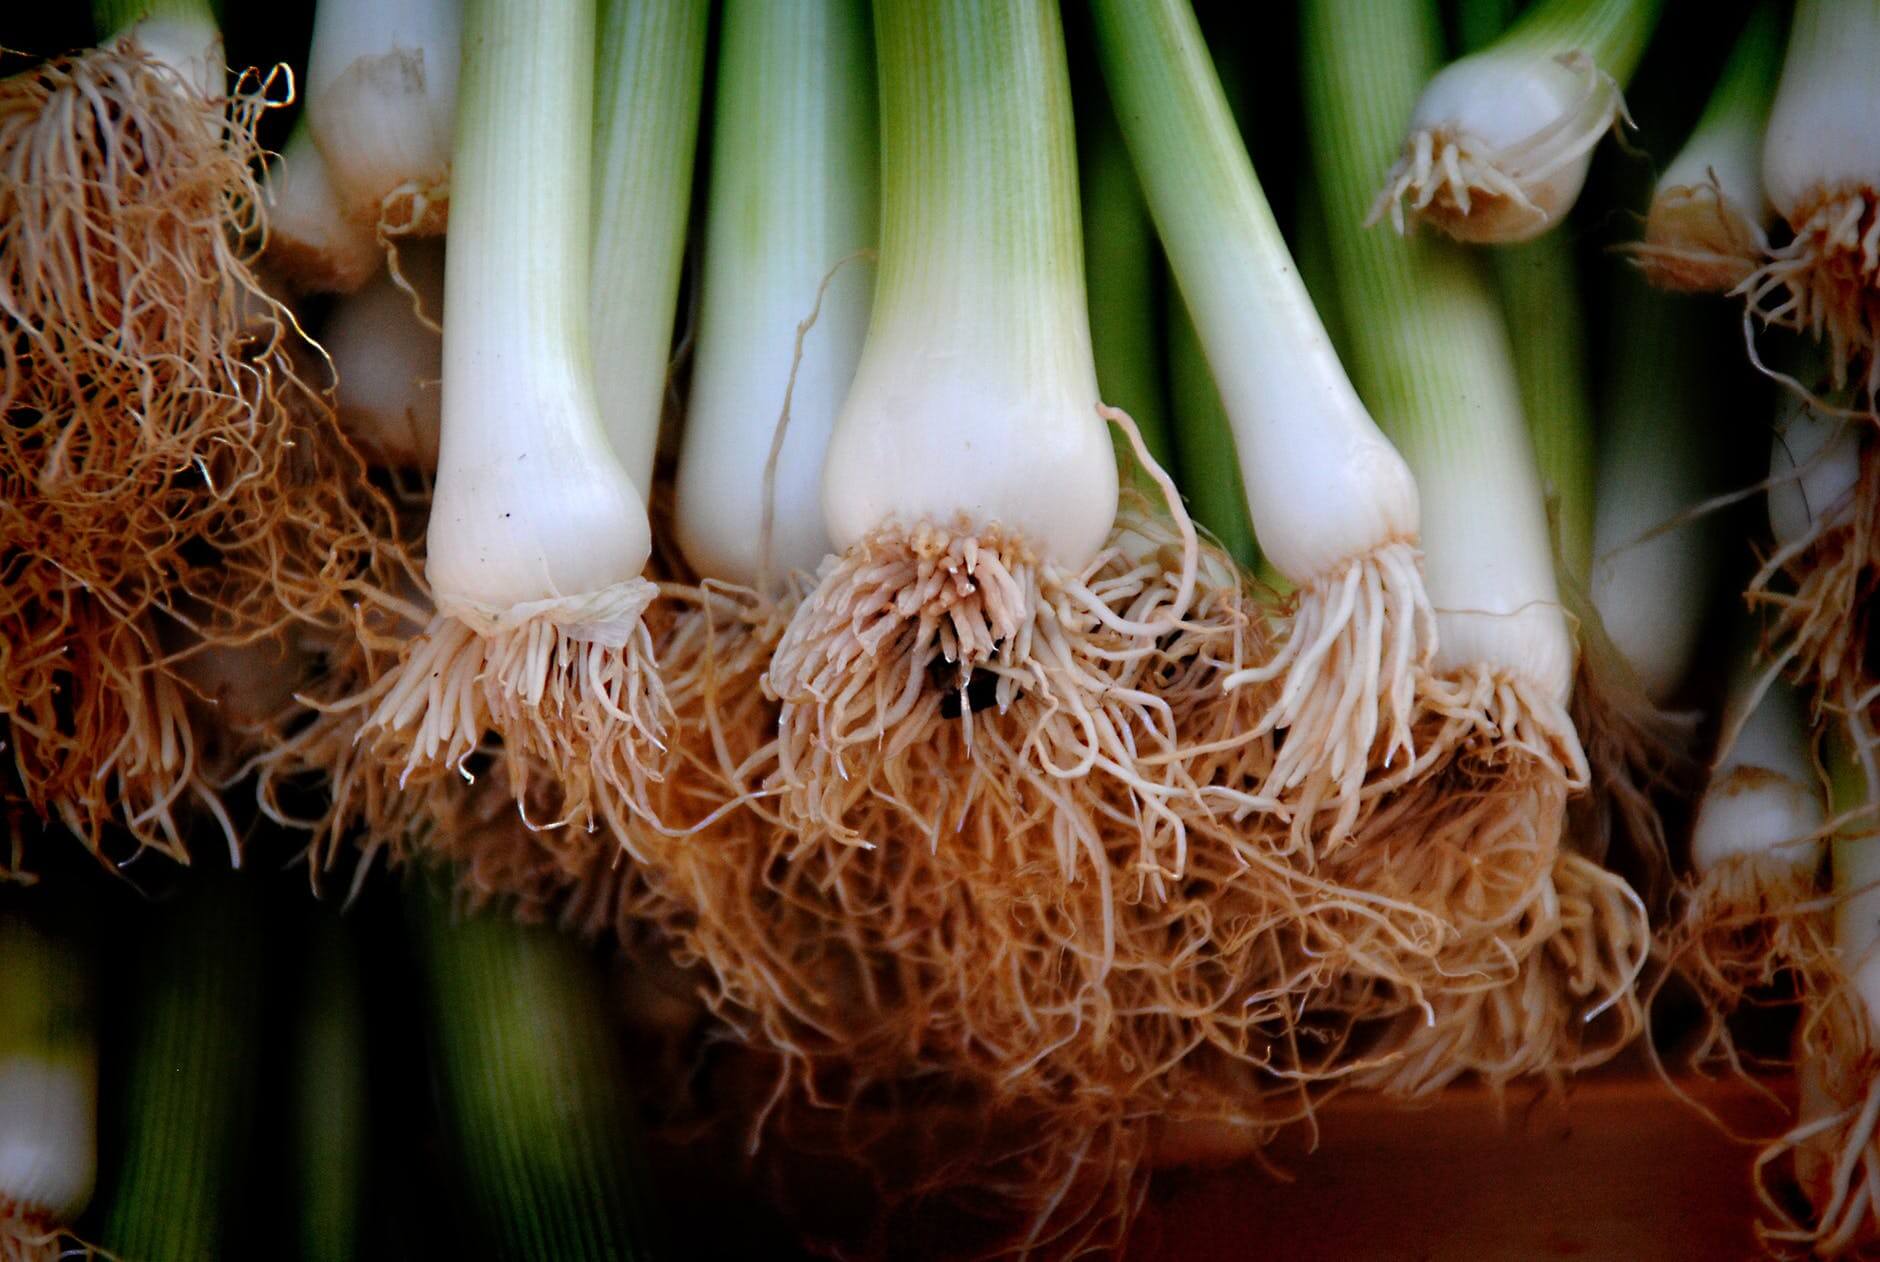 Growing Vegetables From Kitchen Scraps - Spring Onions